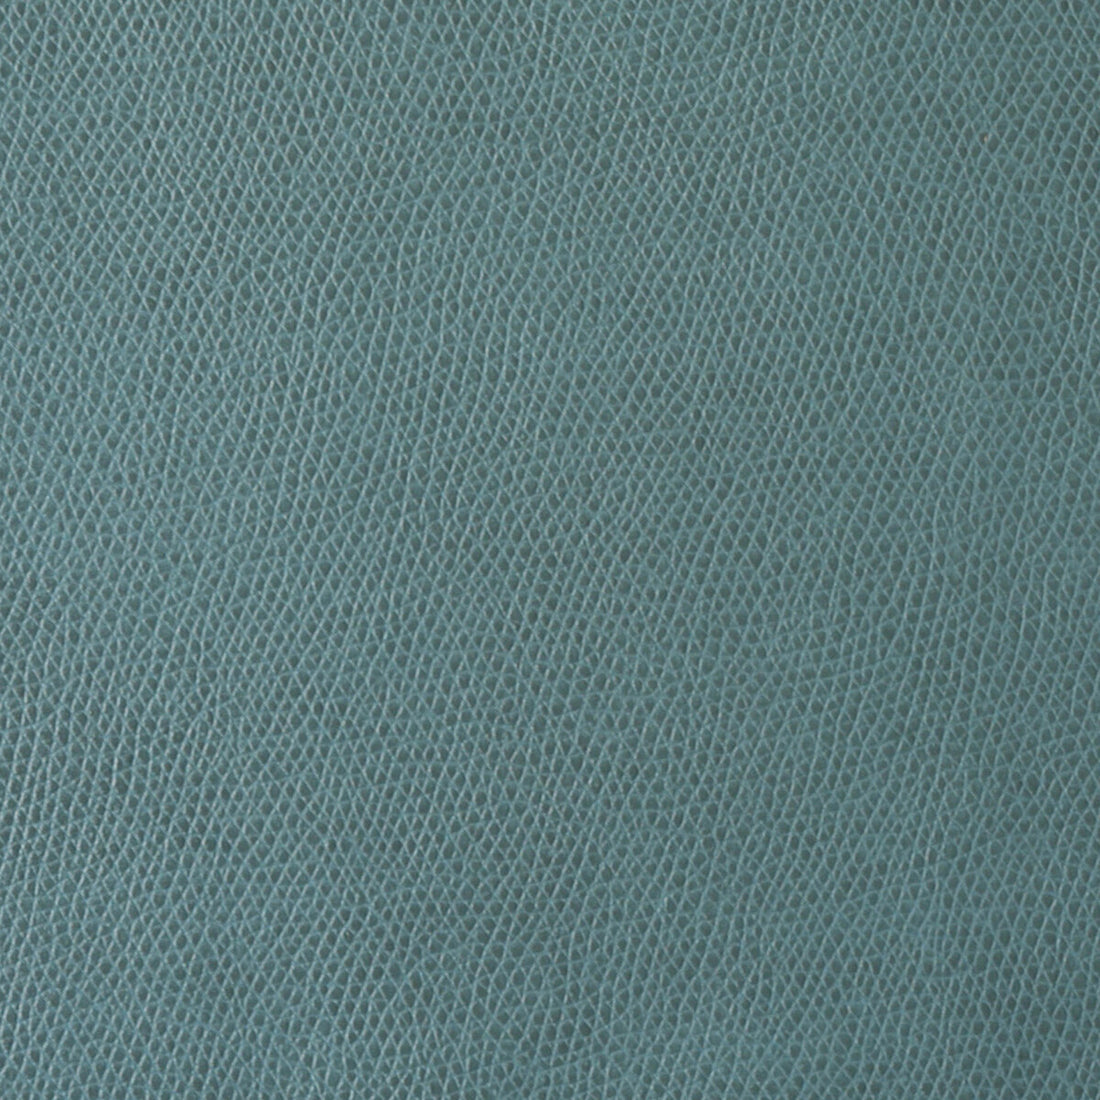 Ophidian fabric in patina color - pattern OPHIDIAN.35.0 - by Kravet Contract in the Contract Sta-Kleen collection